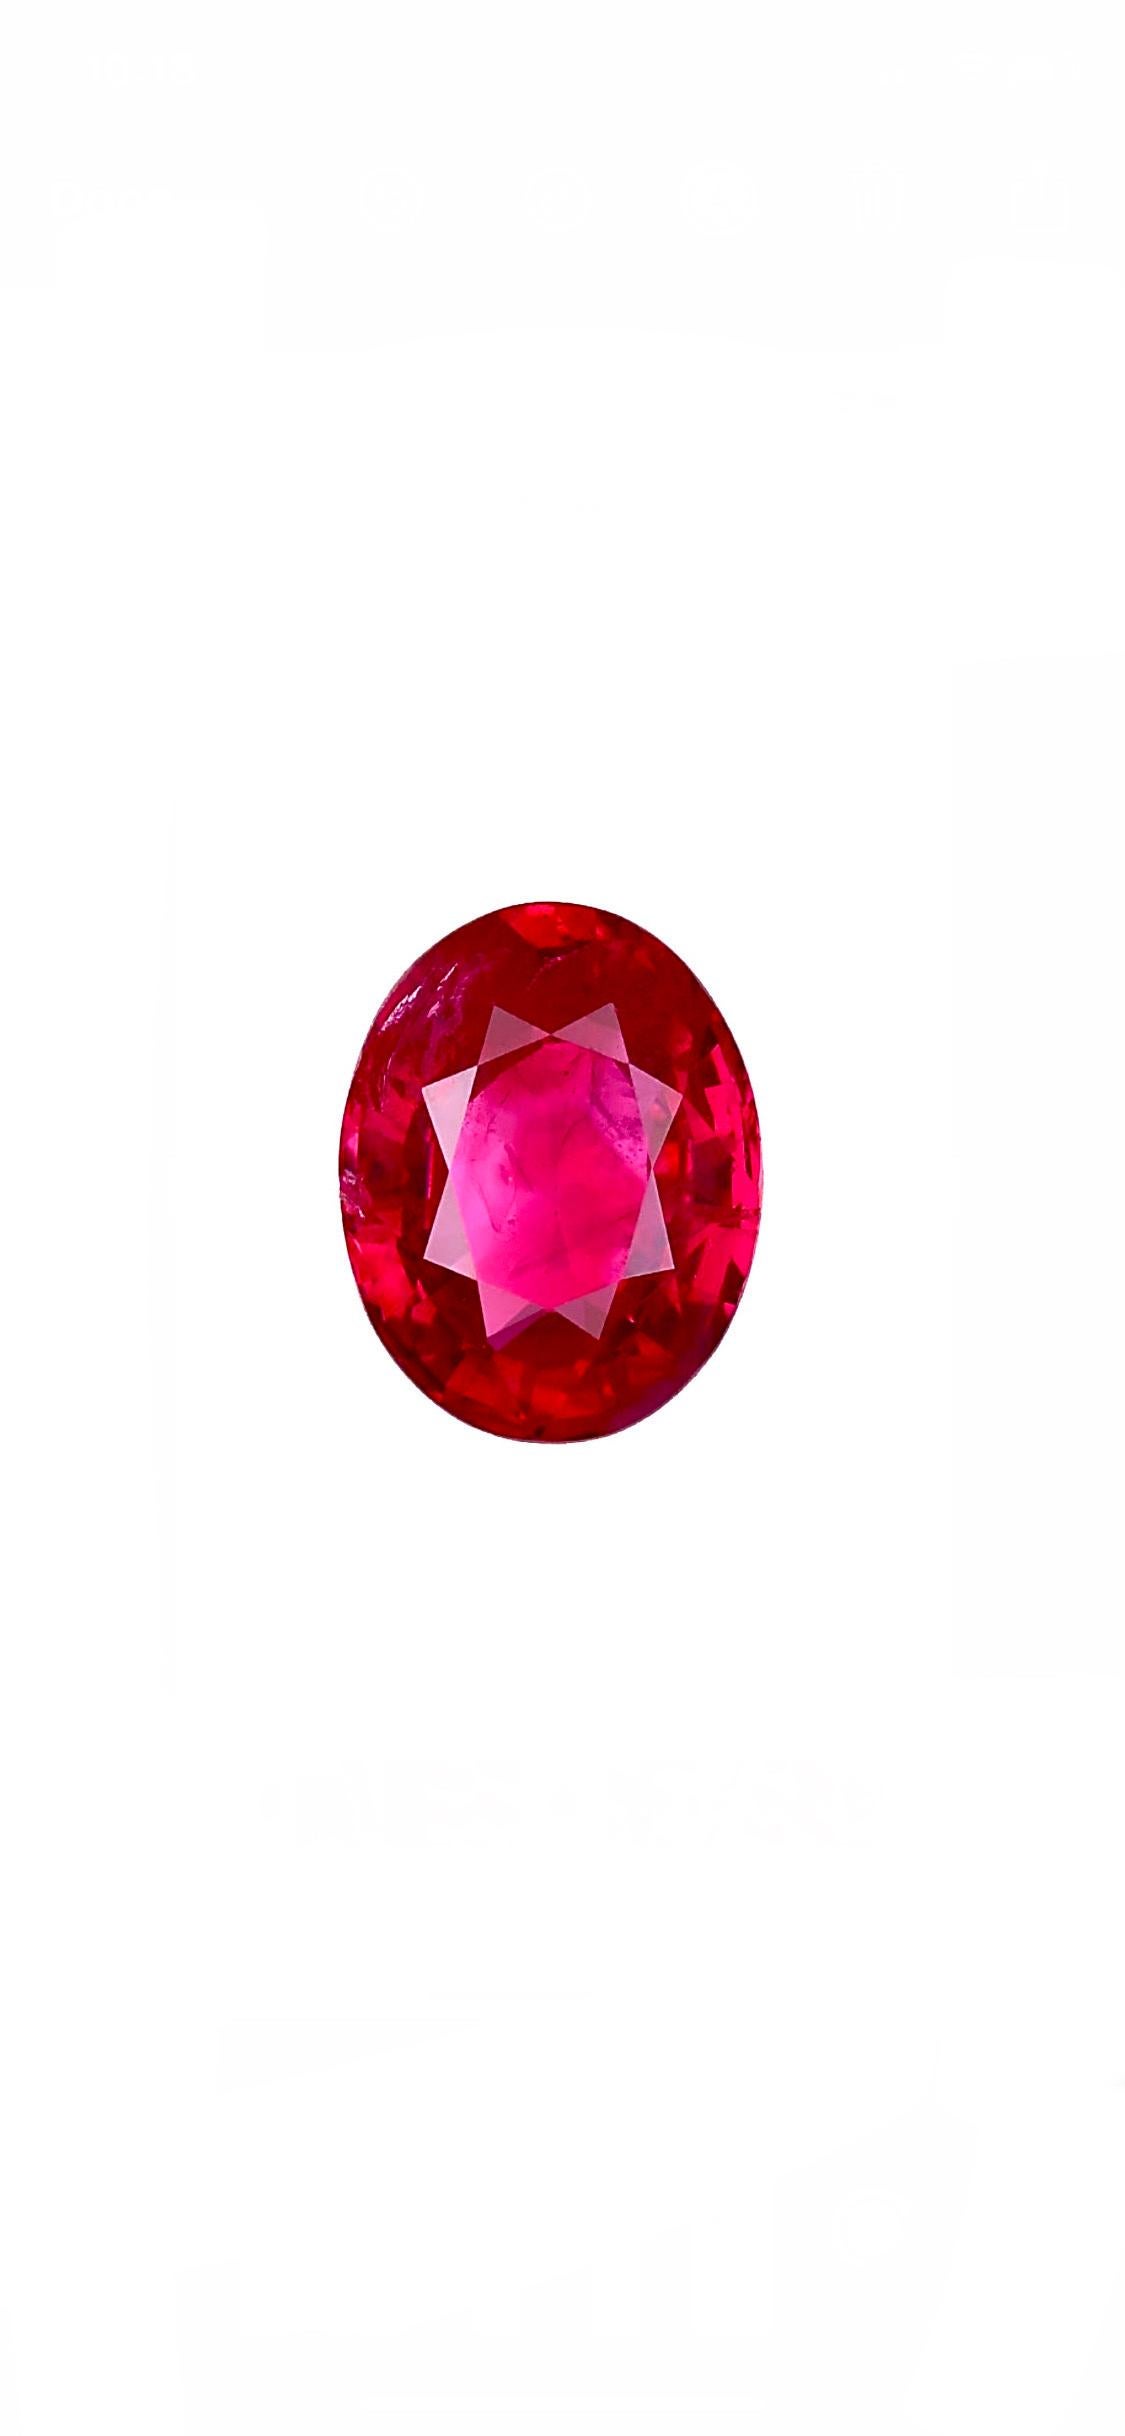 GIA Certified Heat Treated Burmese Ruby

Shape- Oval Modified Brilliant Cut

Carat Weight- 2.49 Carats

GIA Report Number- 5231069287

Measurements- 9.13 x 7.15 x 4.22

An Amazing Burmese Ruby That is Out of This World!

Featuring An Amazing GIA